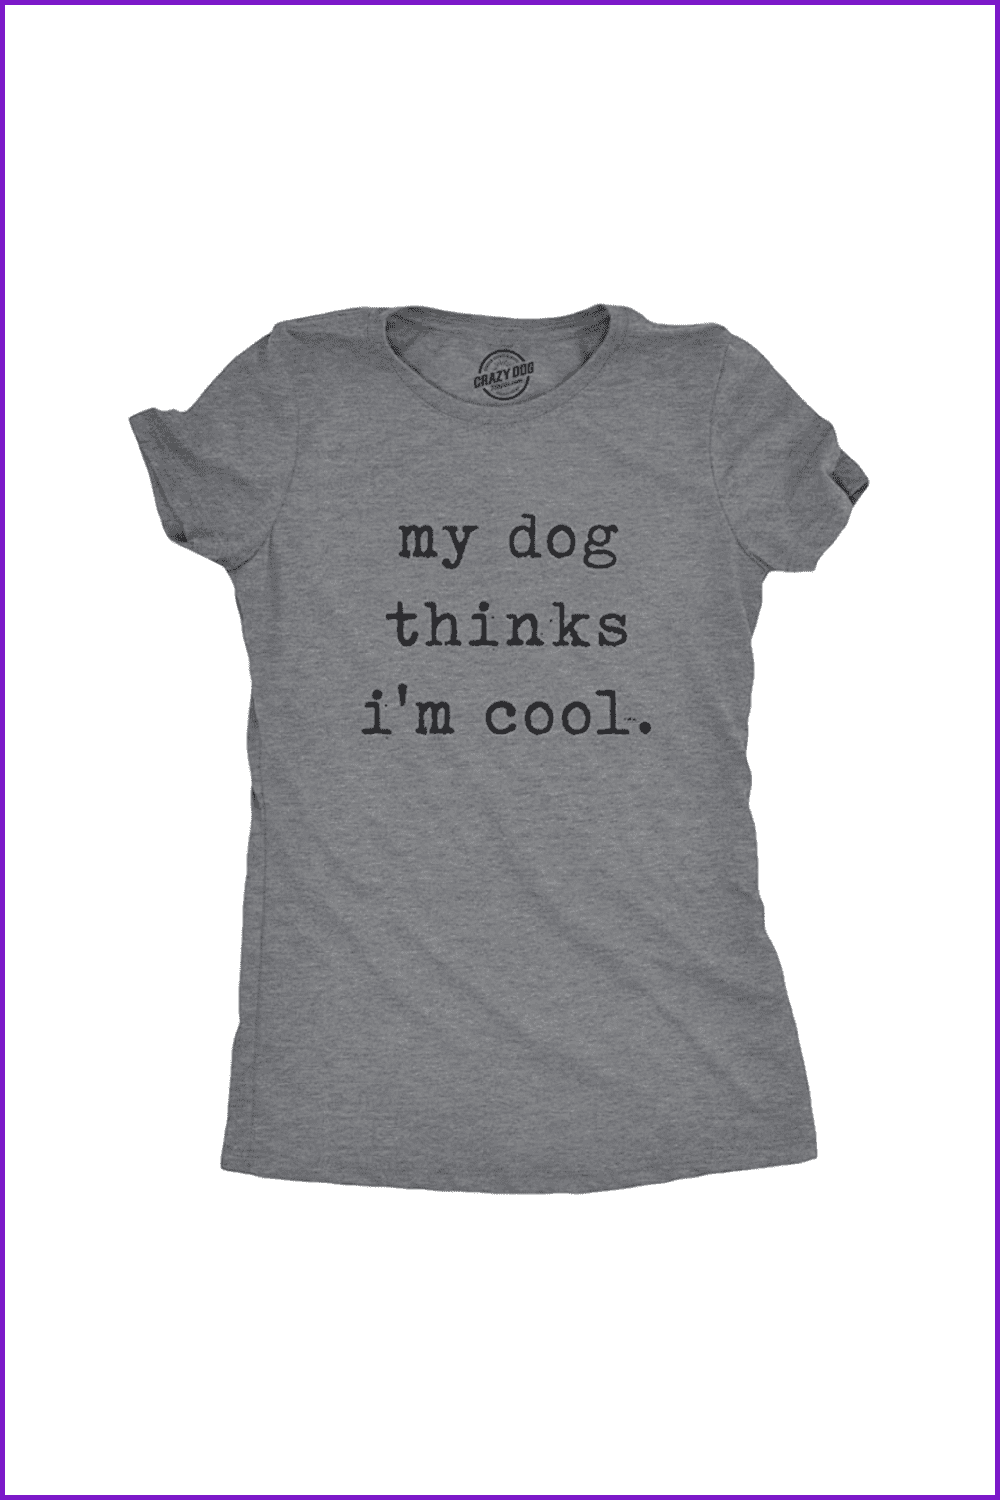 Womens My Dog Thinks I’m Cool T Shirt Funny Pet Lover Novelty Gift Cute Graphic.